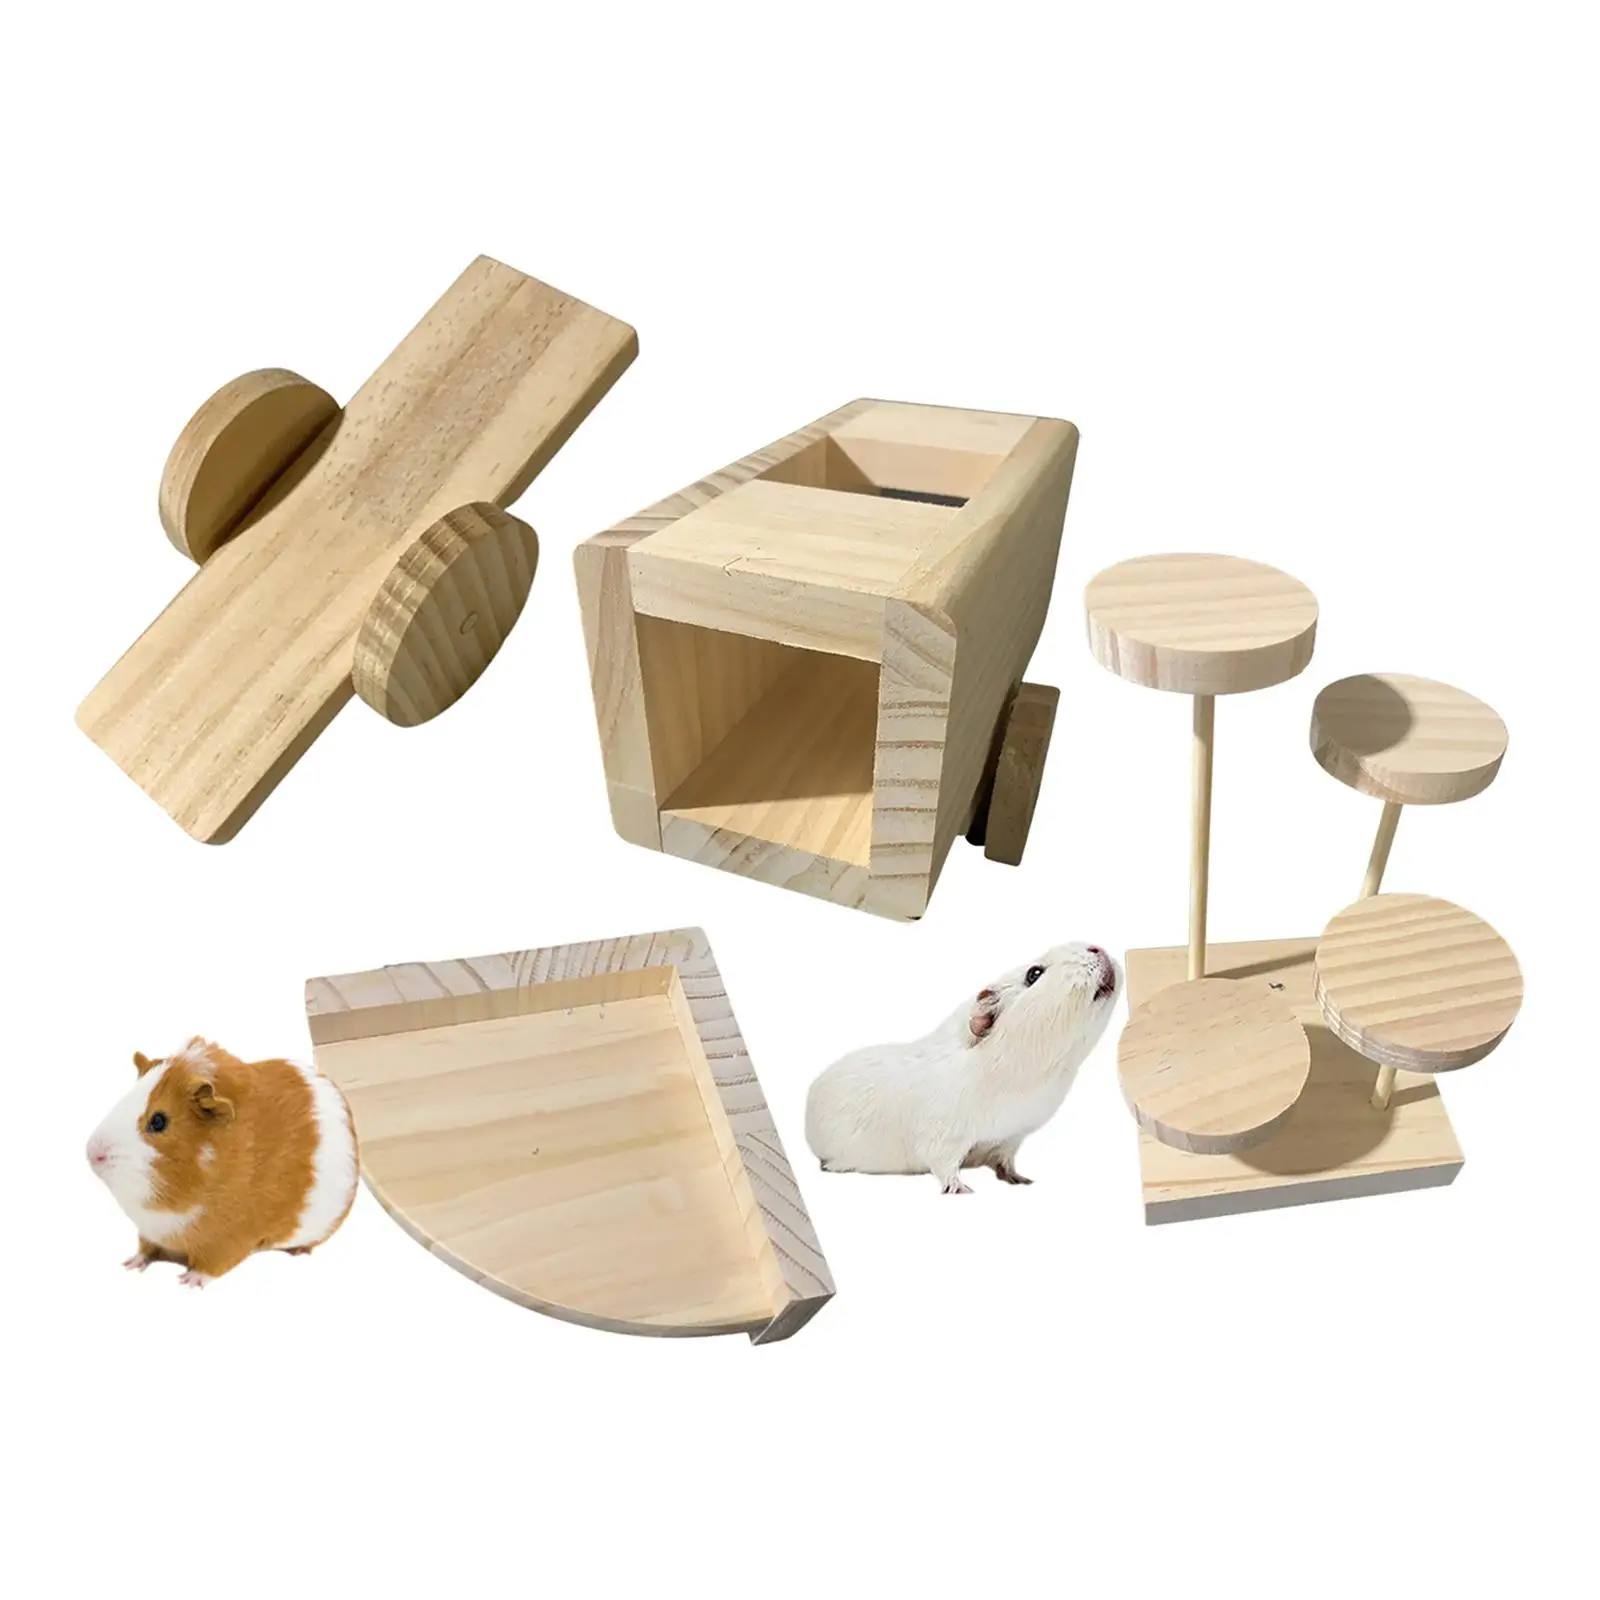 Wooden Hamster Toy for Guinea Pig Bunny Chinchilla Seesaw Platform Ladder